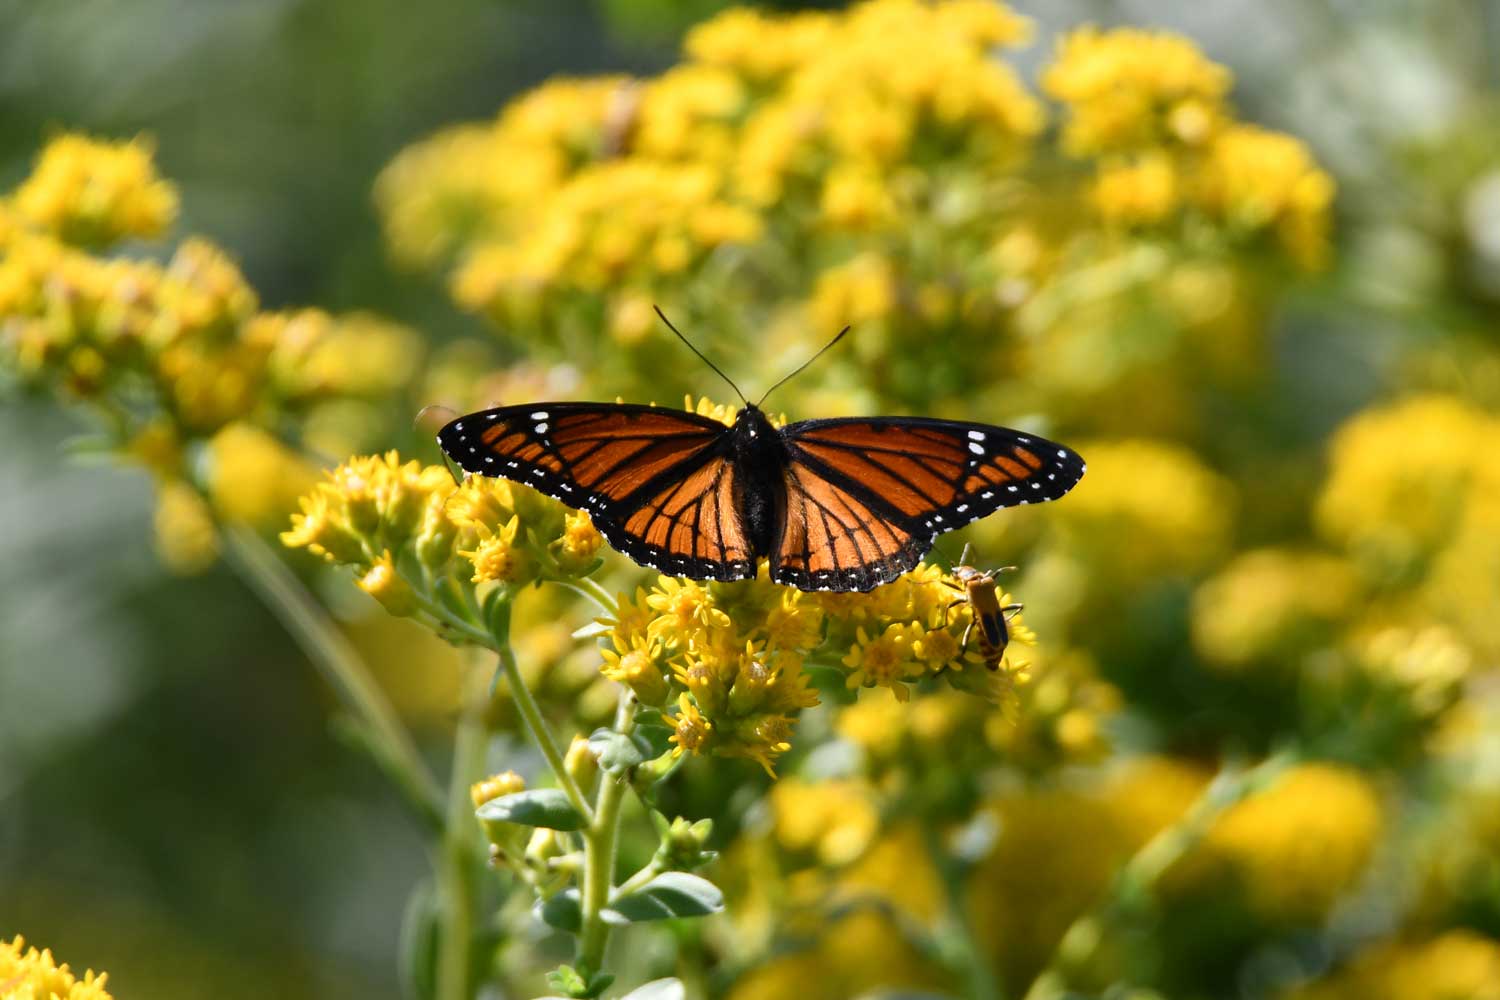 Viceroy butterfly sitting on yellow flower blooms.